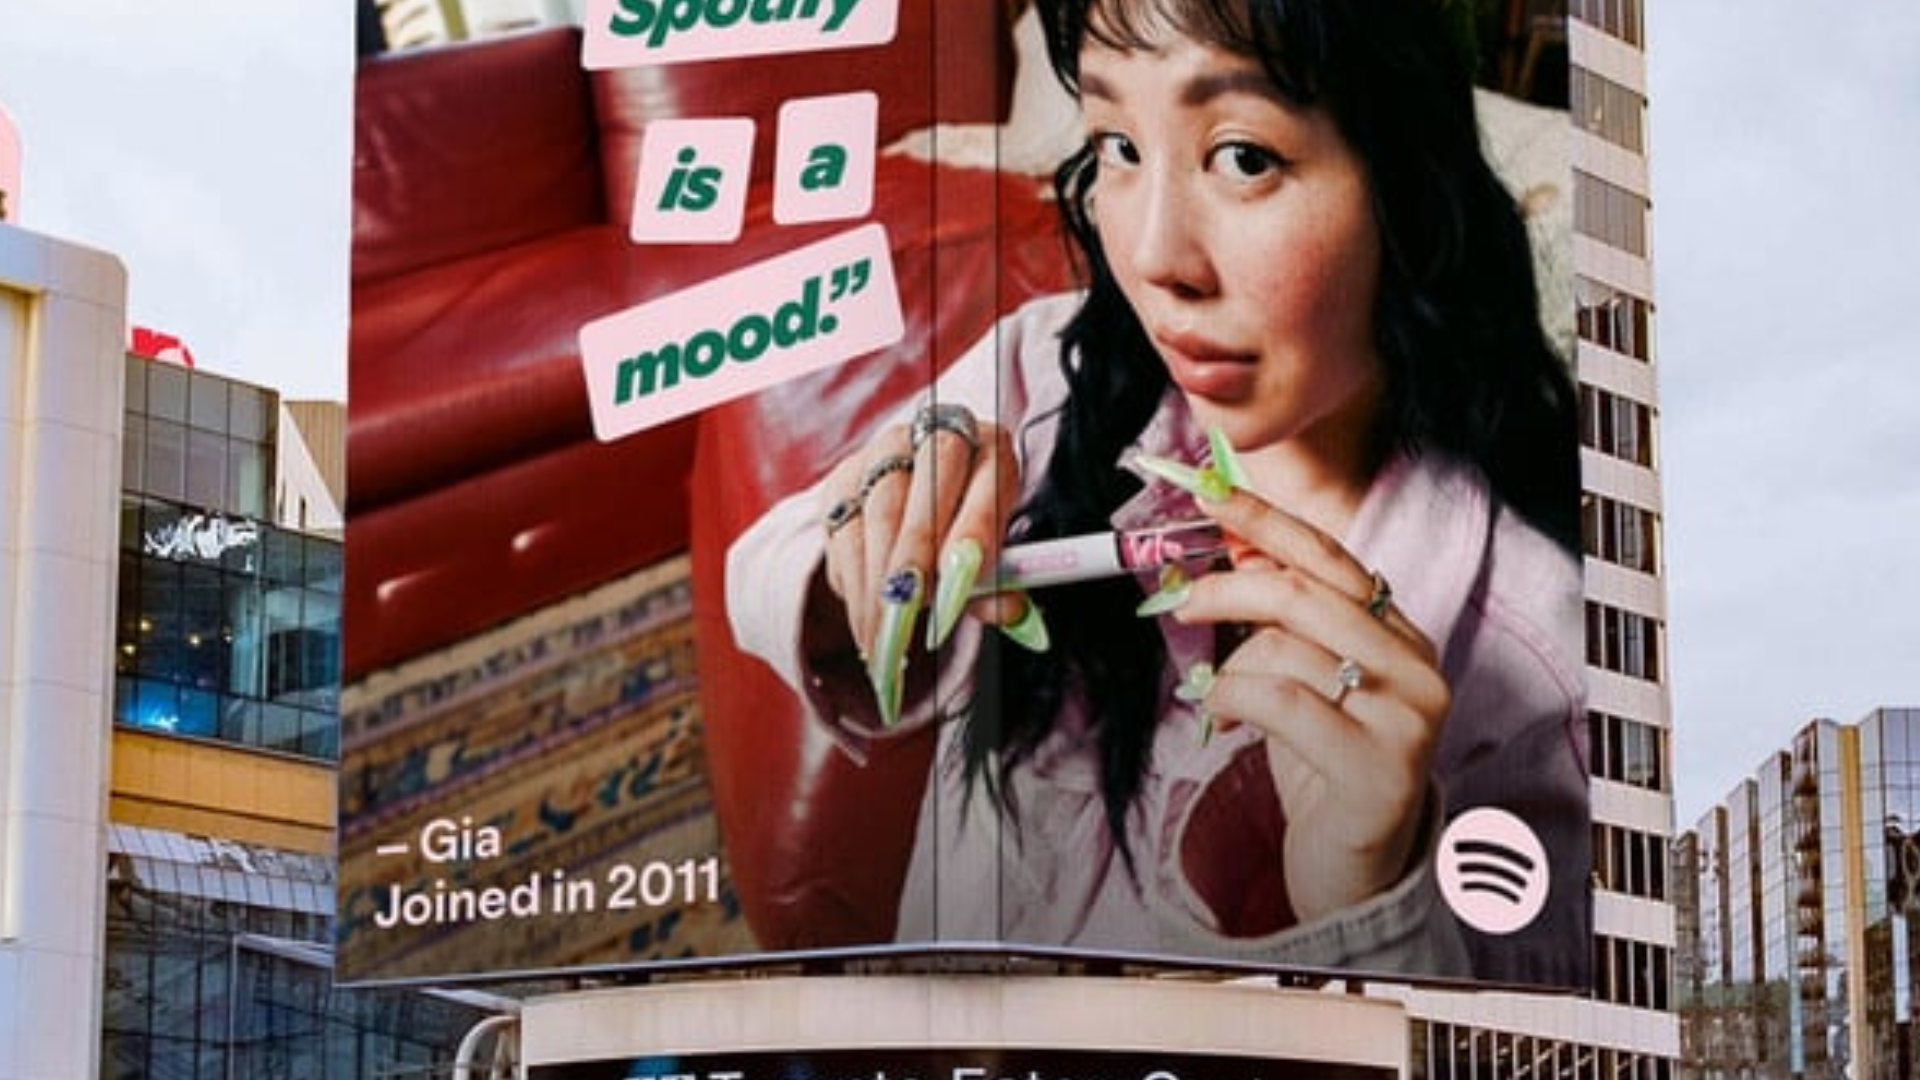 SPOTIFY AMPS UP PERSONALIZATION IN BIGGEST GLOBAL BRAND CAMPAIGN SINCE WRAPPED